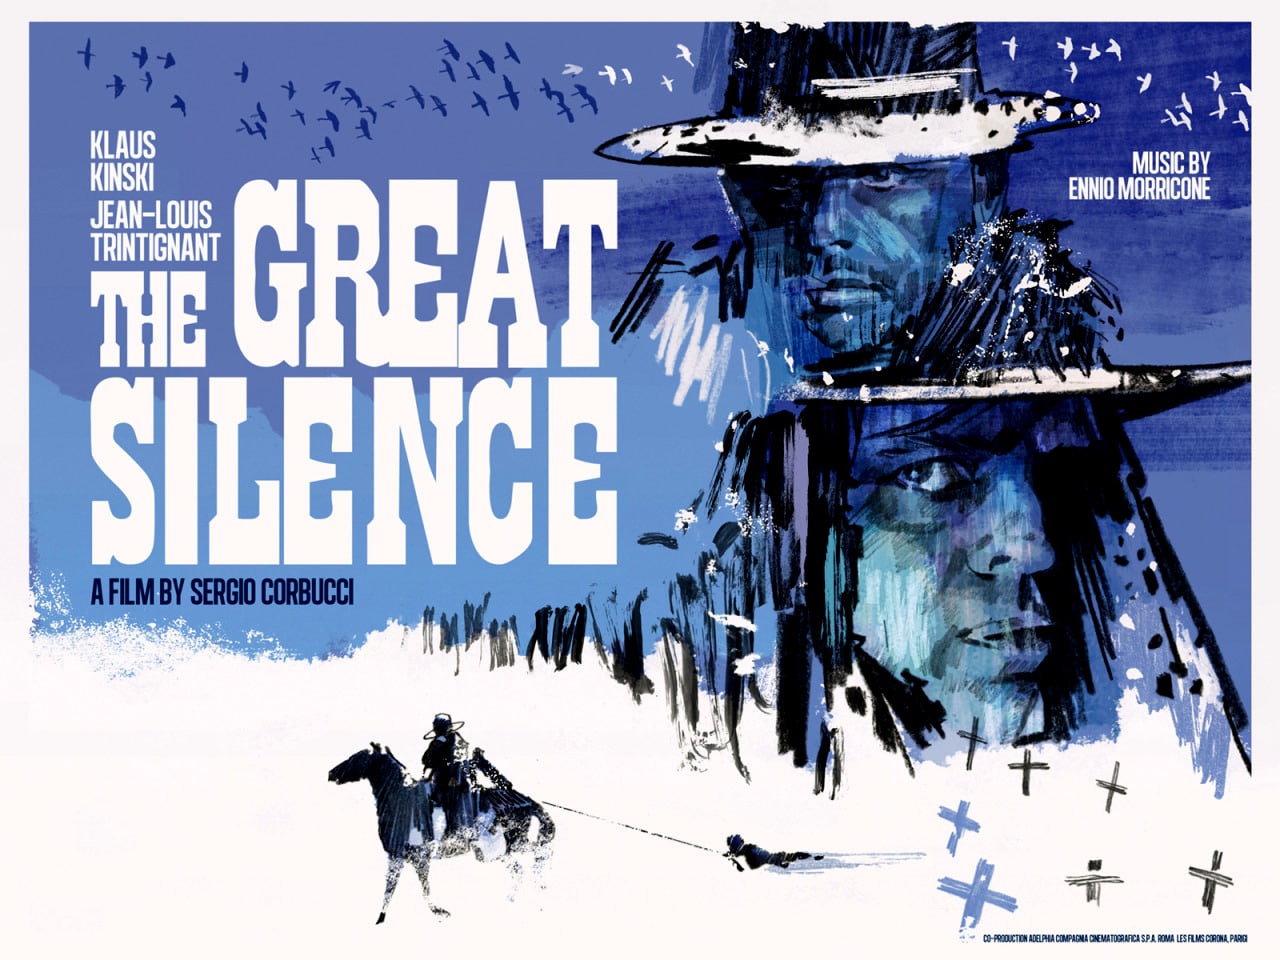 The Great Silence by Sergio Corbucci on sale for $4.99 at iTunes  - $4.99